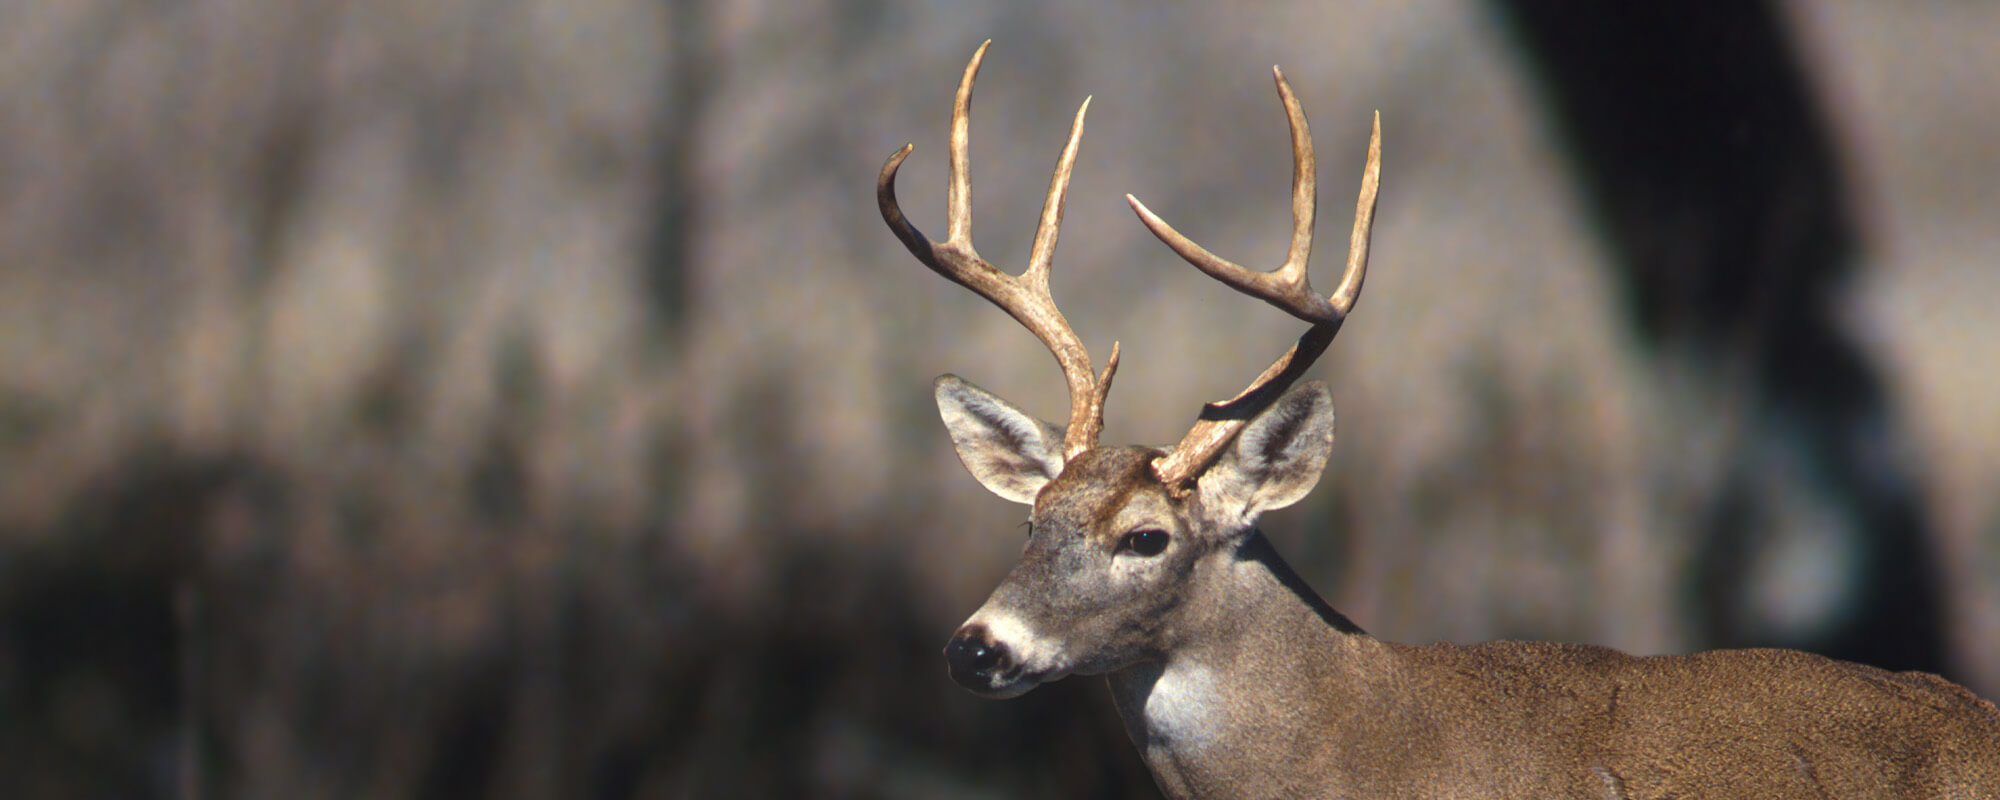 White-tailed Deer Antler Score: A Pictorial Presentation